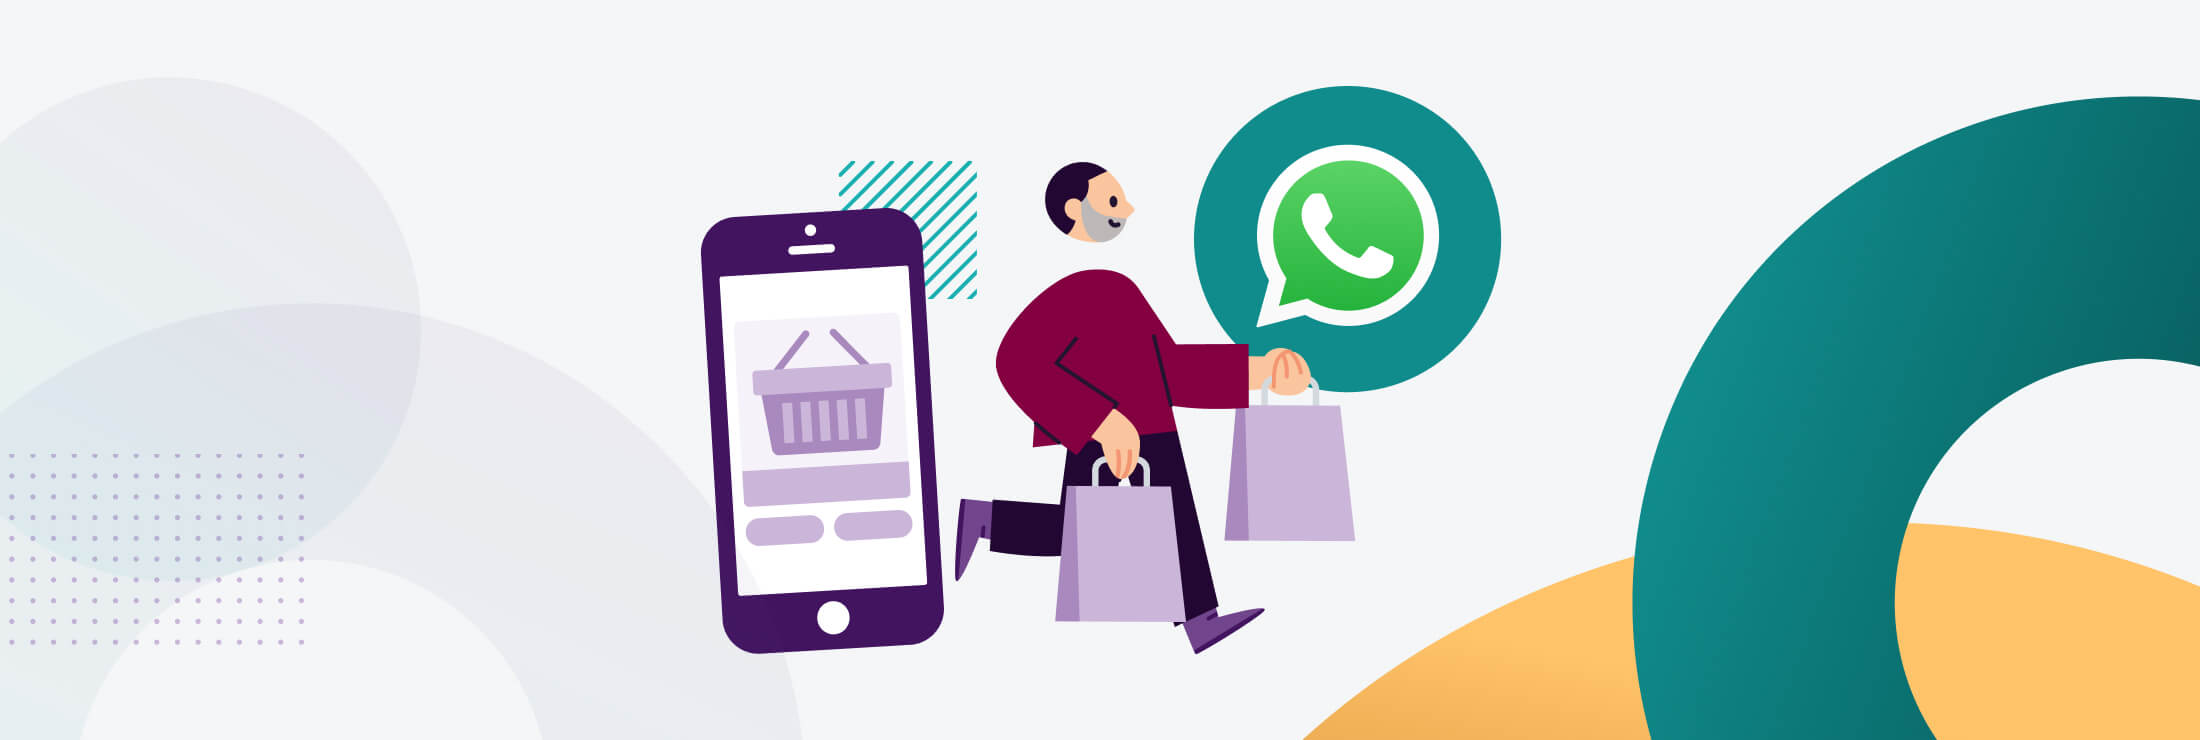 Image of person shopping, graphic of WhatsApp and of a phone. To show how WhatsApp Business Platform can help business continuity in retail